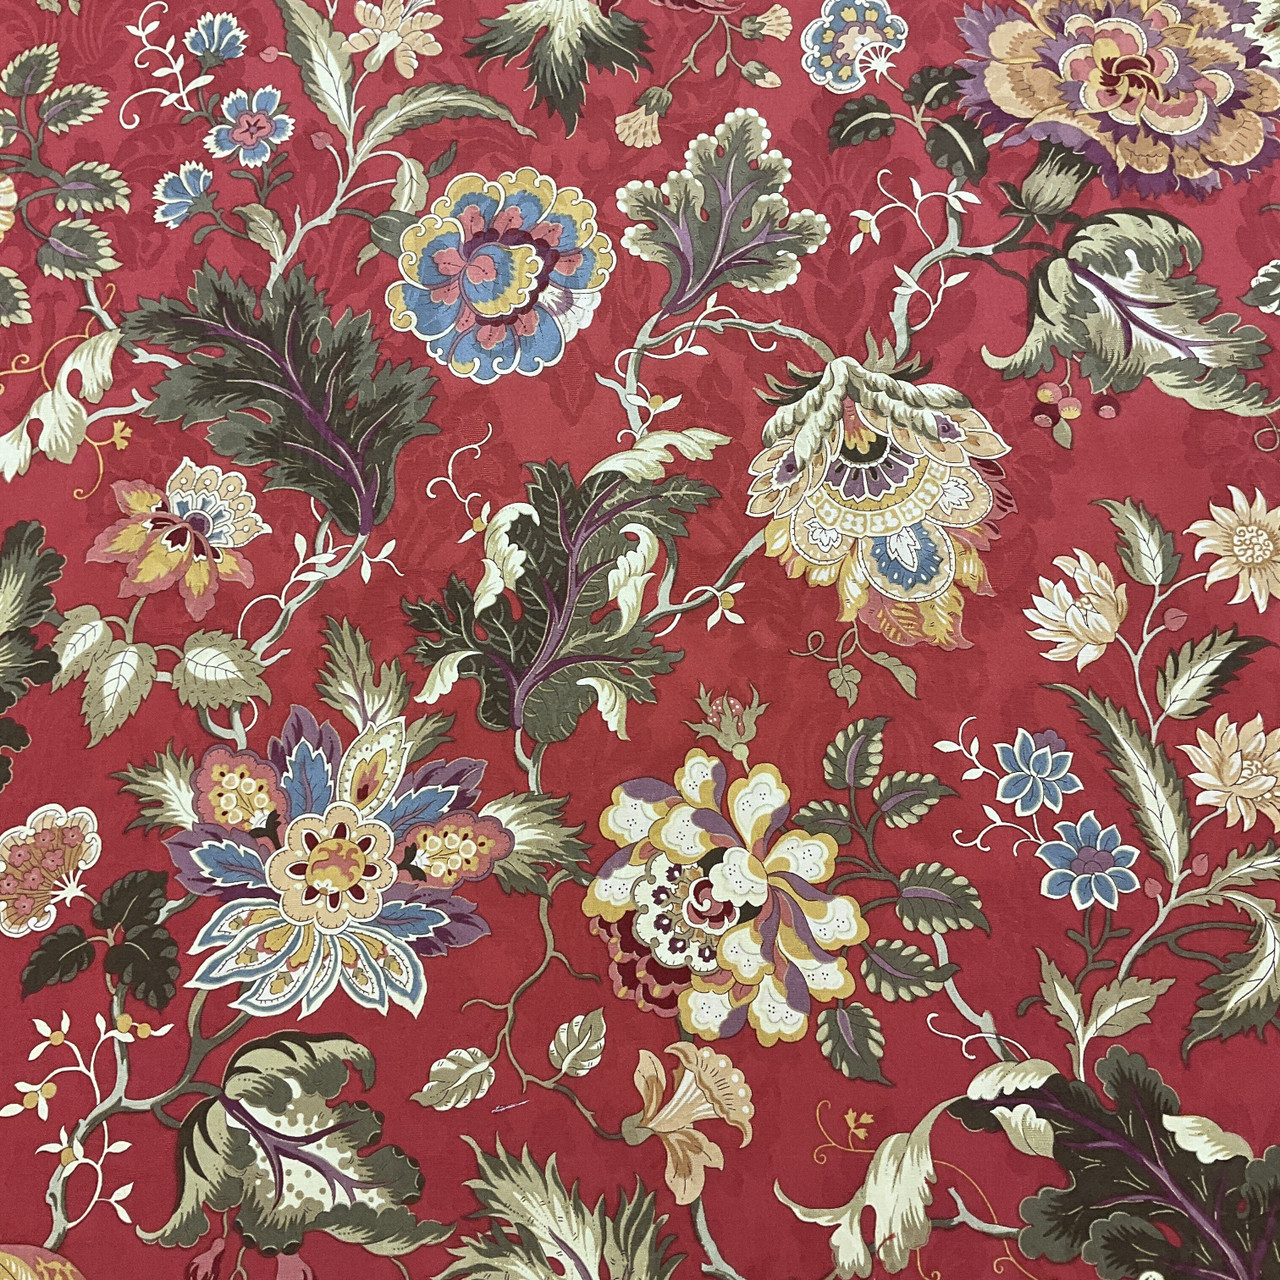 https://cdn11.bigcommerce.com/s-z9t2ne/images/stencil/1280x1280/products/57770/494550/jacobean-floral-brocade-in-red-gold-green__84701__20342.1696691870.jpg?c=2